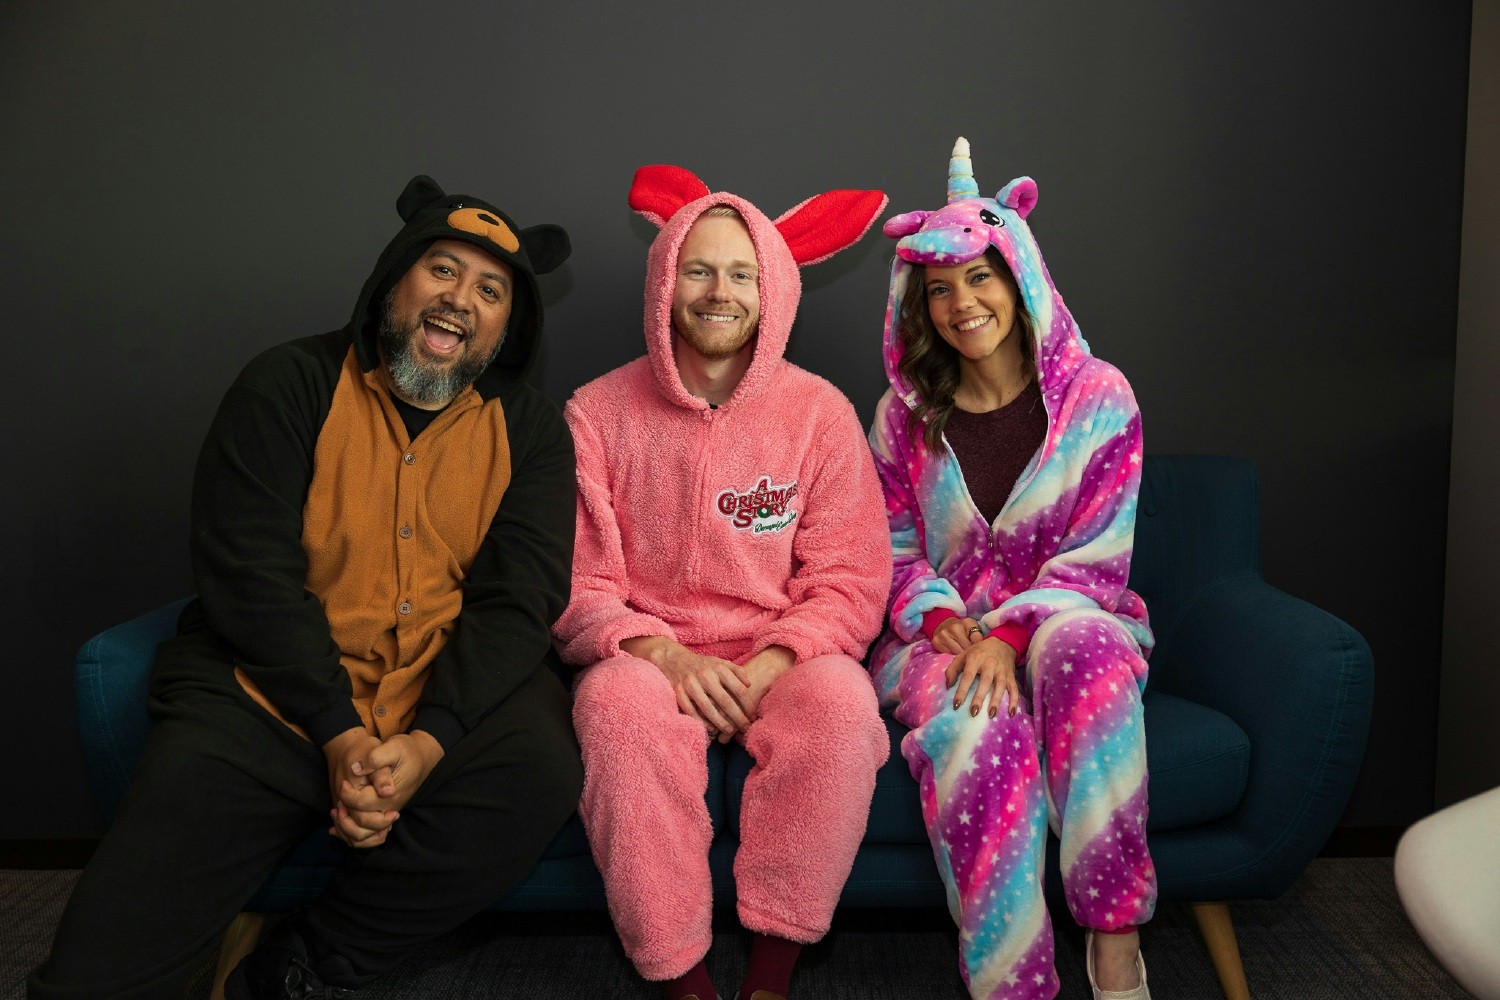 We’ve celebrated “Onesie Tuesday” at RII for 8 years and counting!
